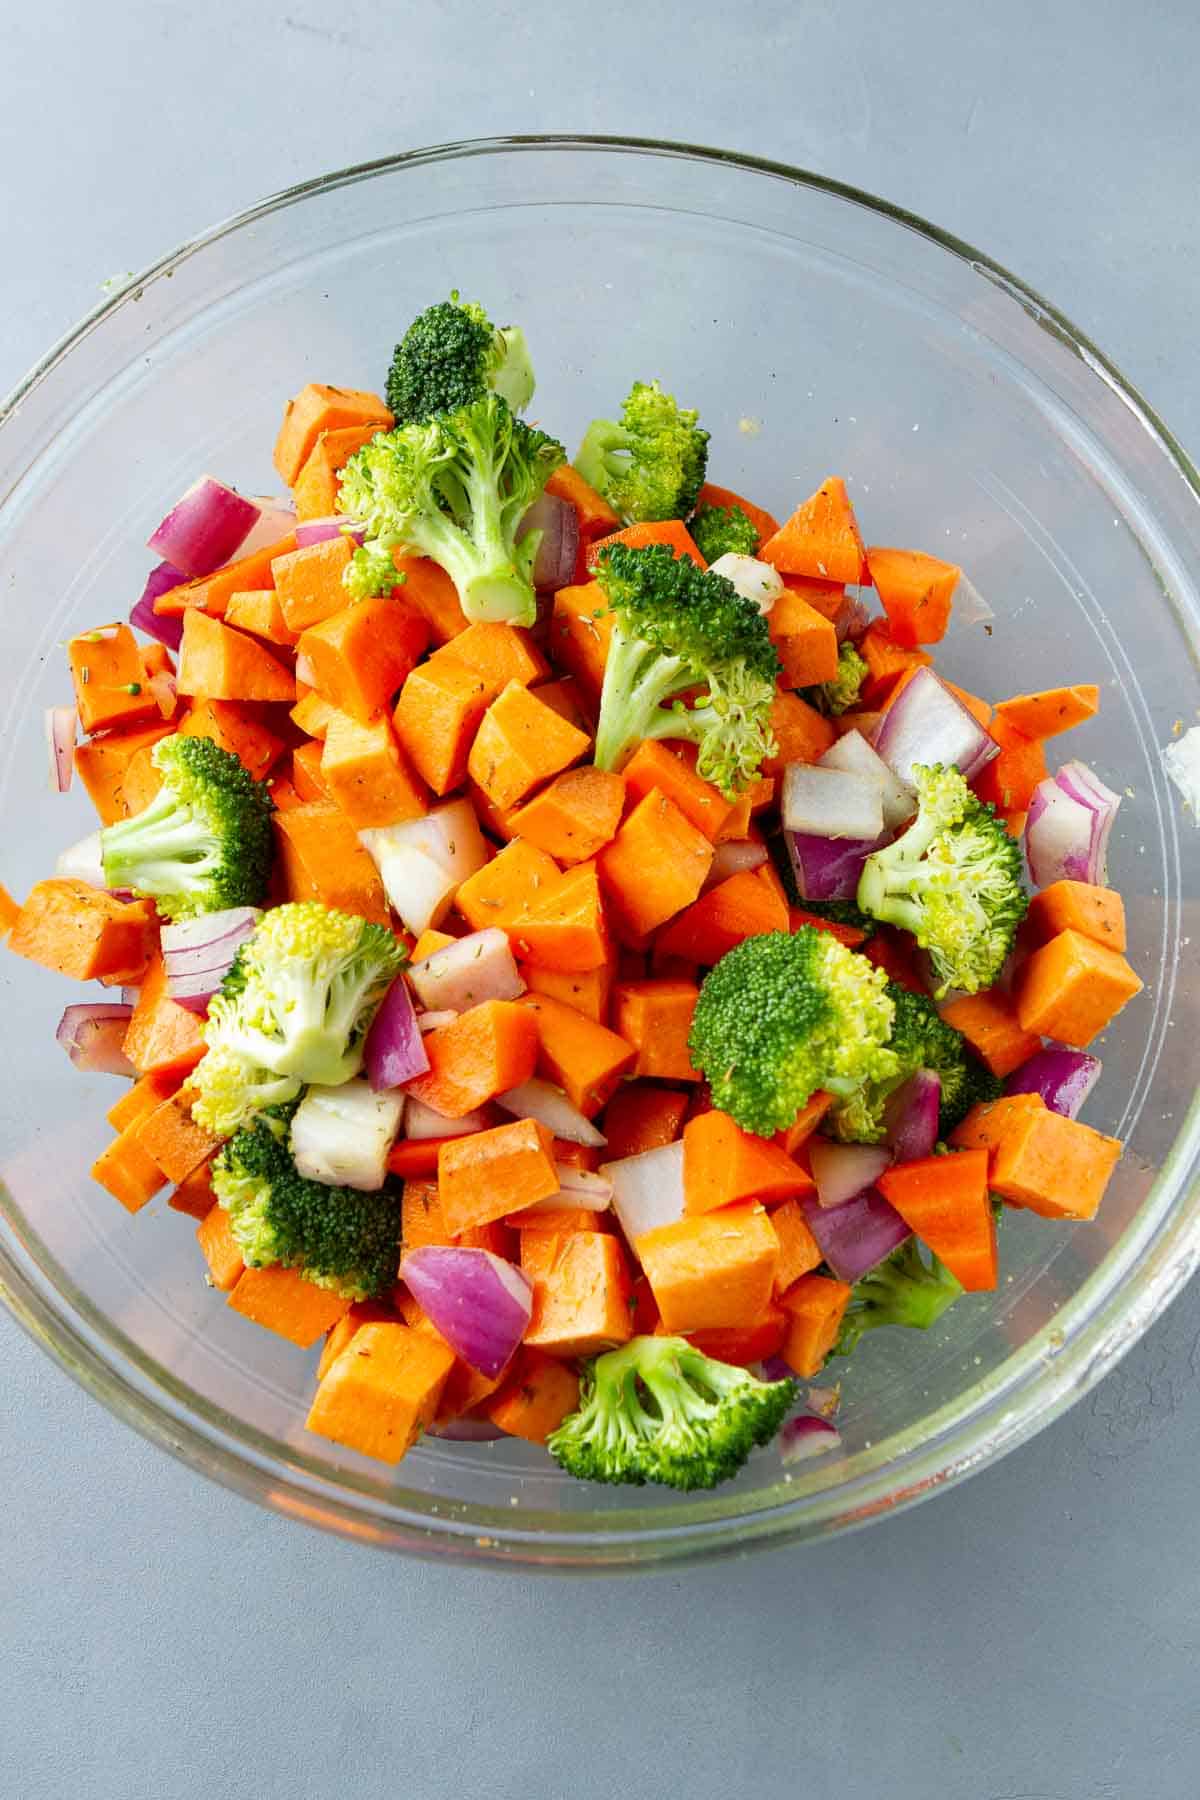 Chopped broccoli, sweet potato and red onion in a glass bowl.